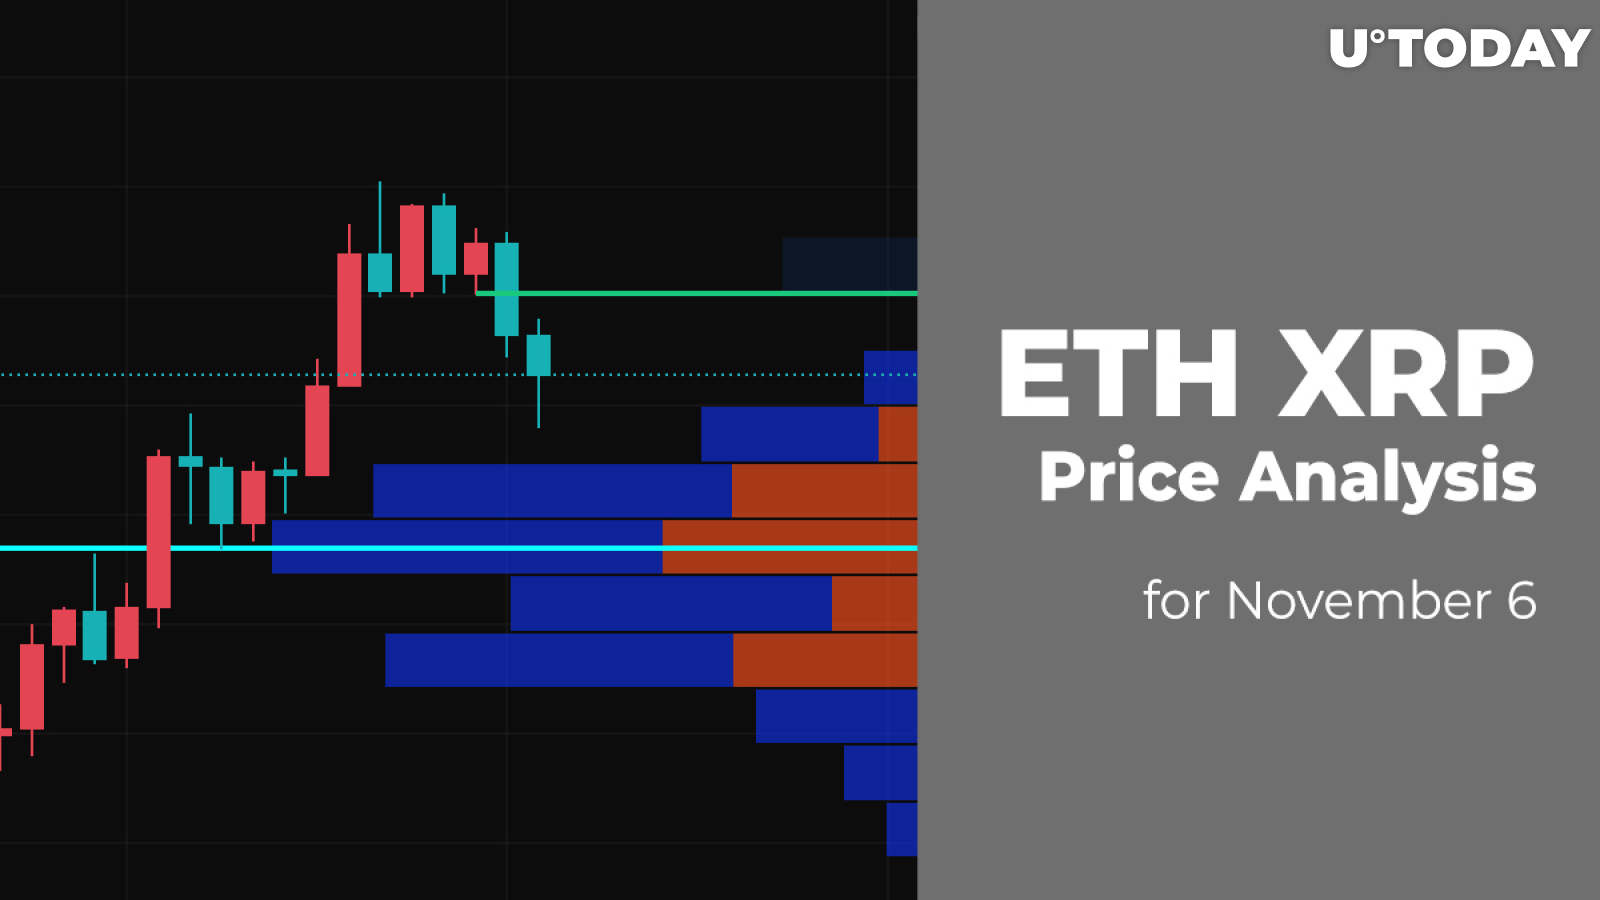 ETH and XRP Price Analysis for November 6